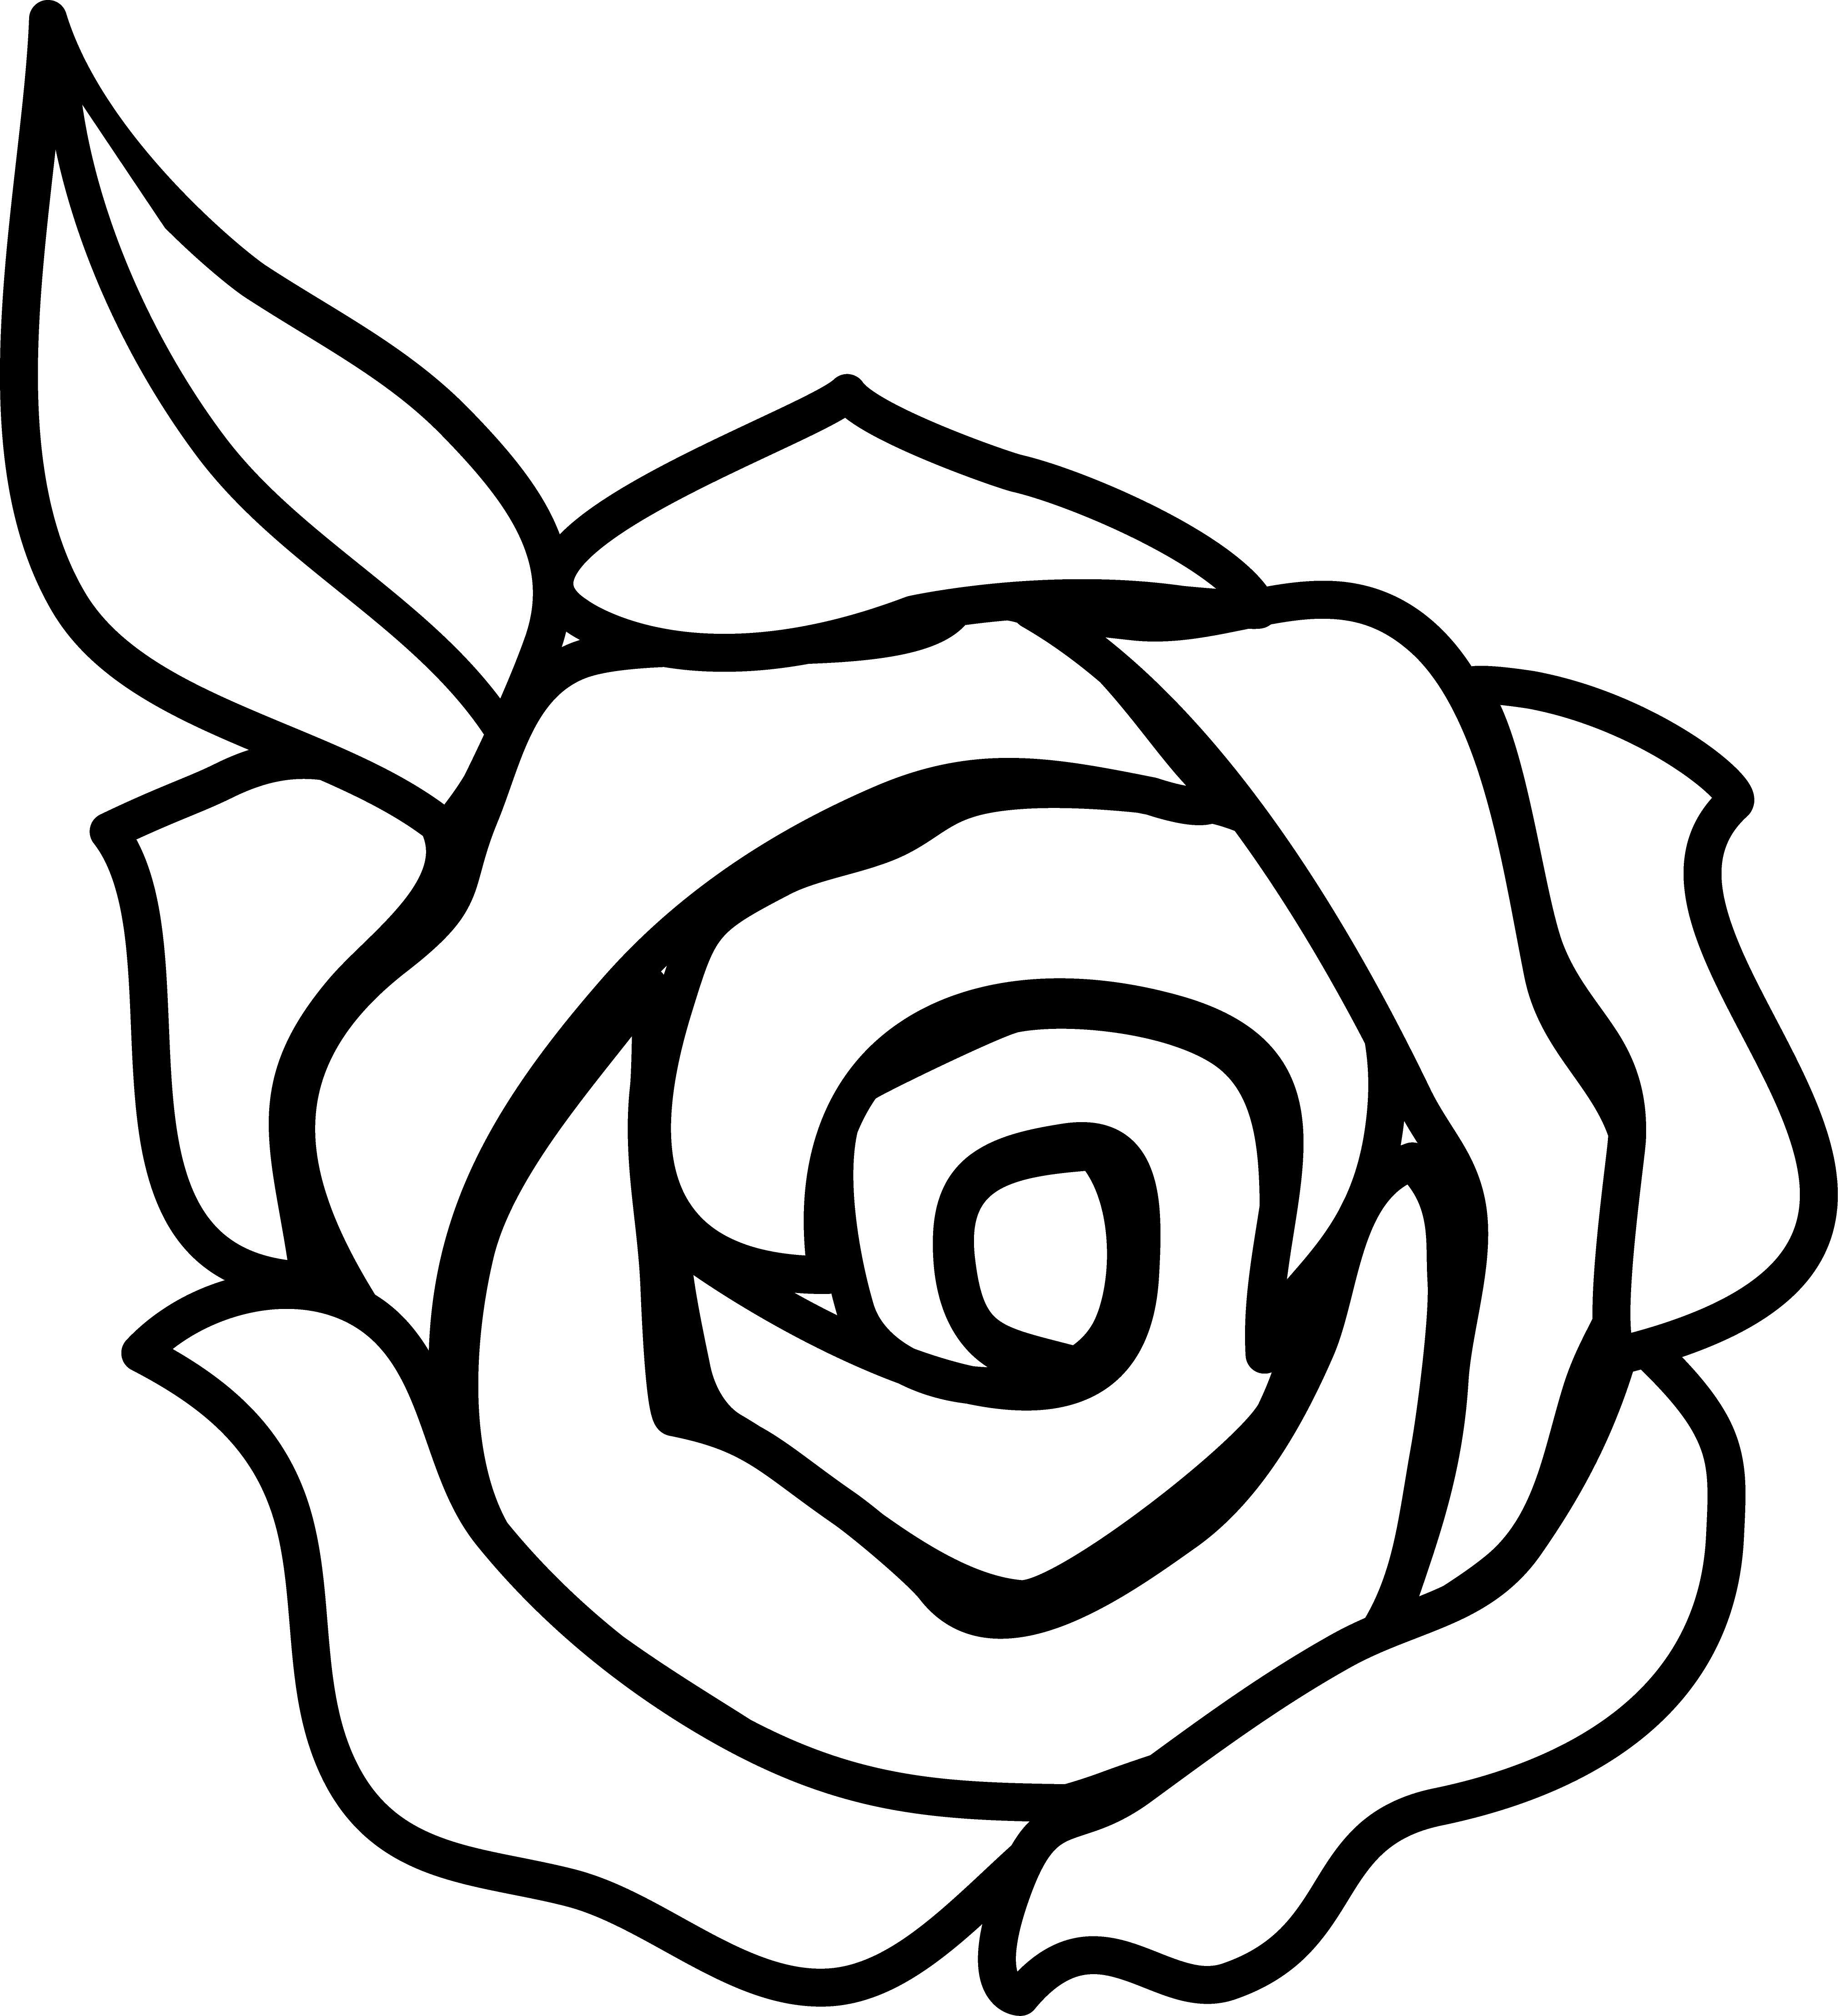 Rose Outline Clipart | Clipart Panda - Free Clipart Images